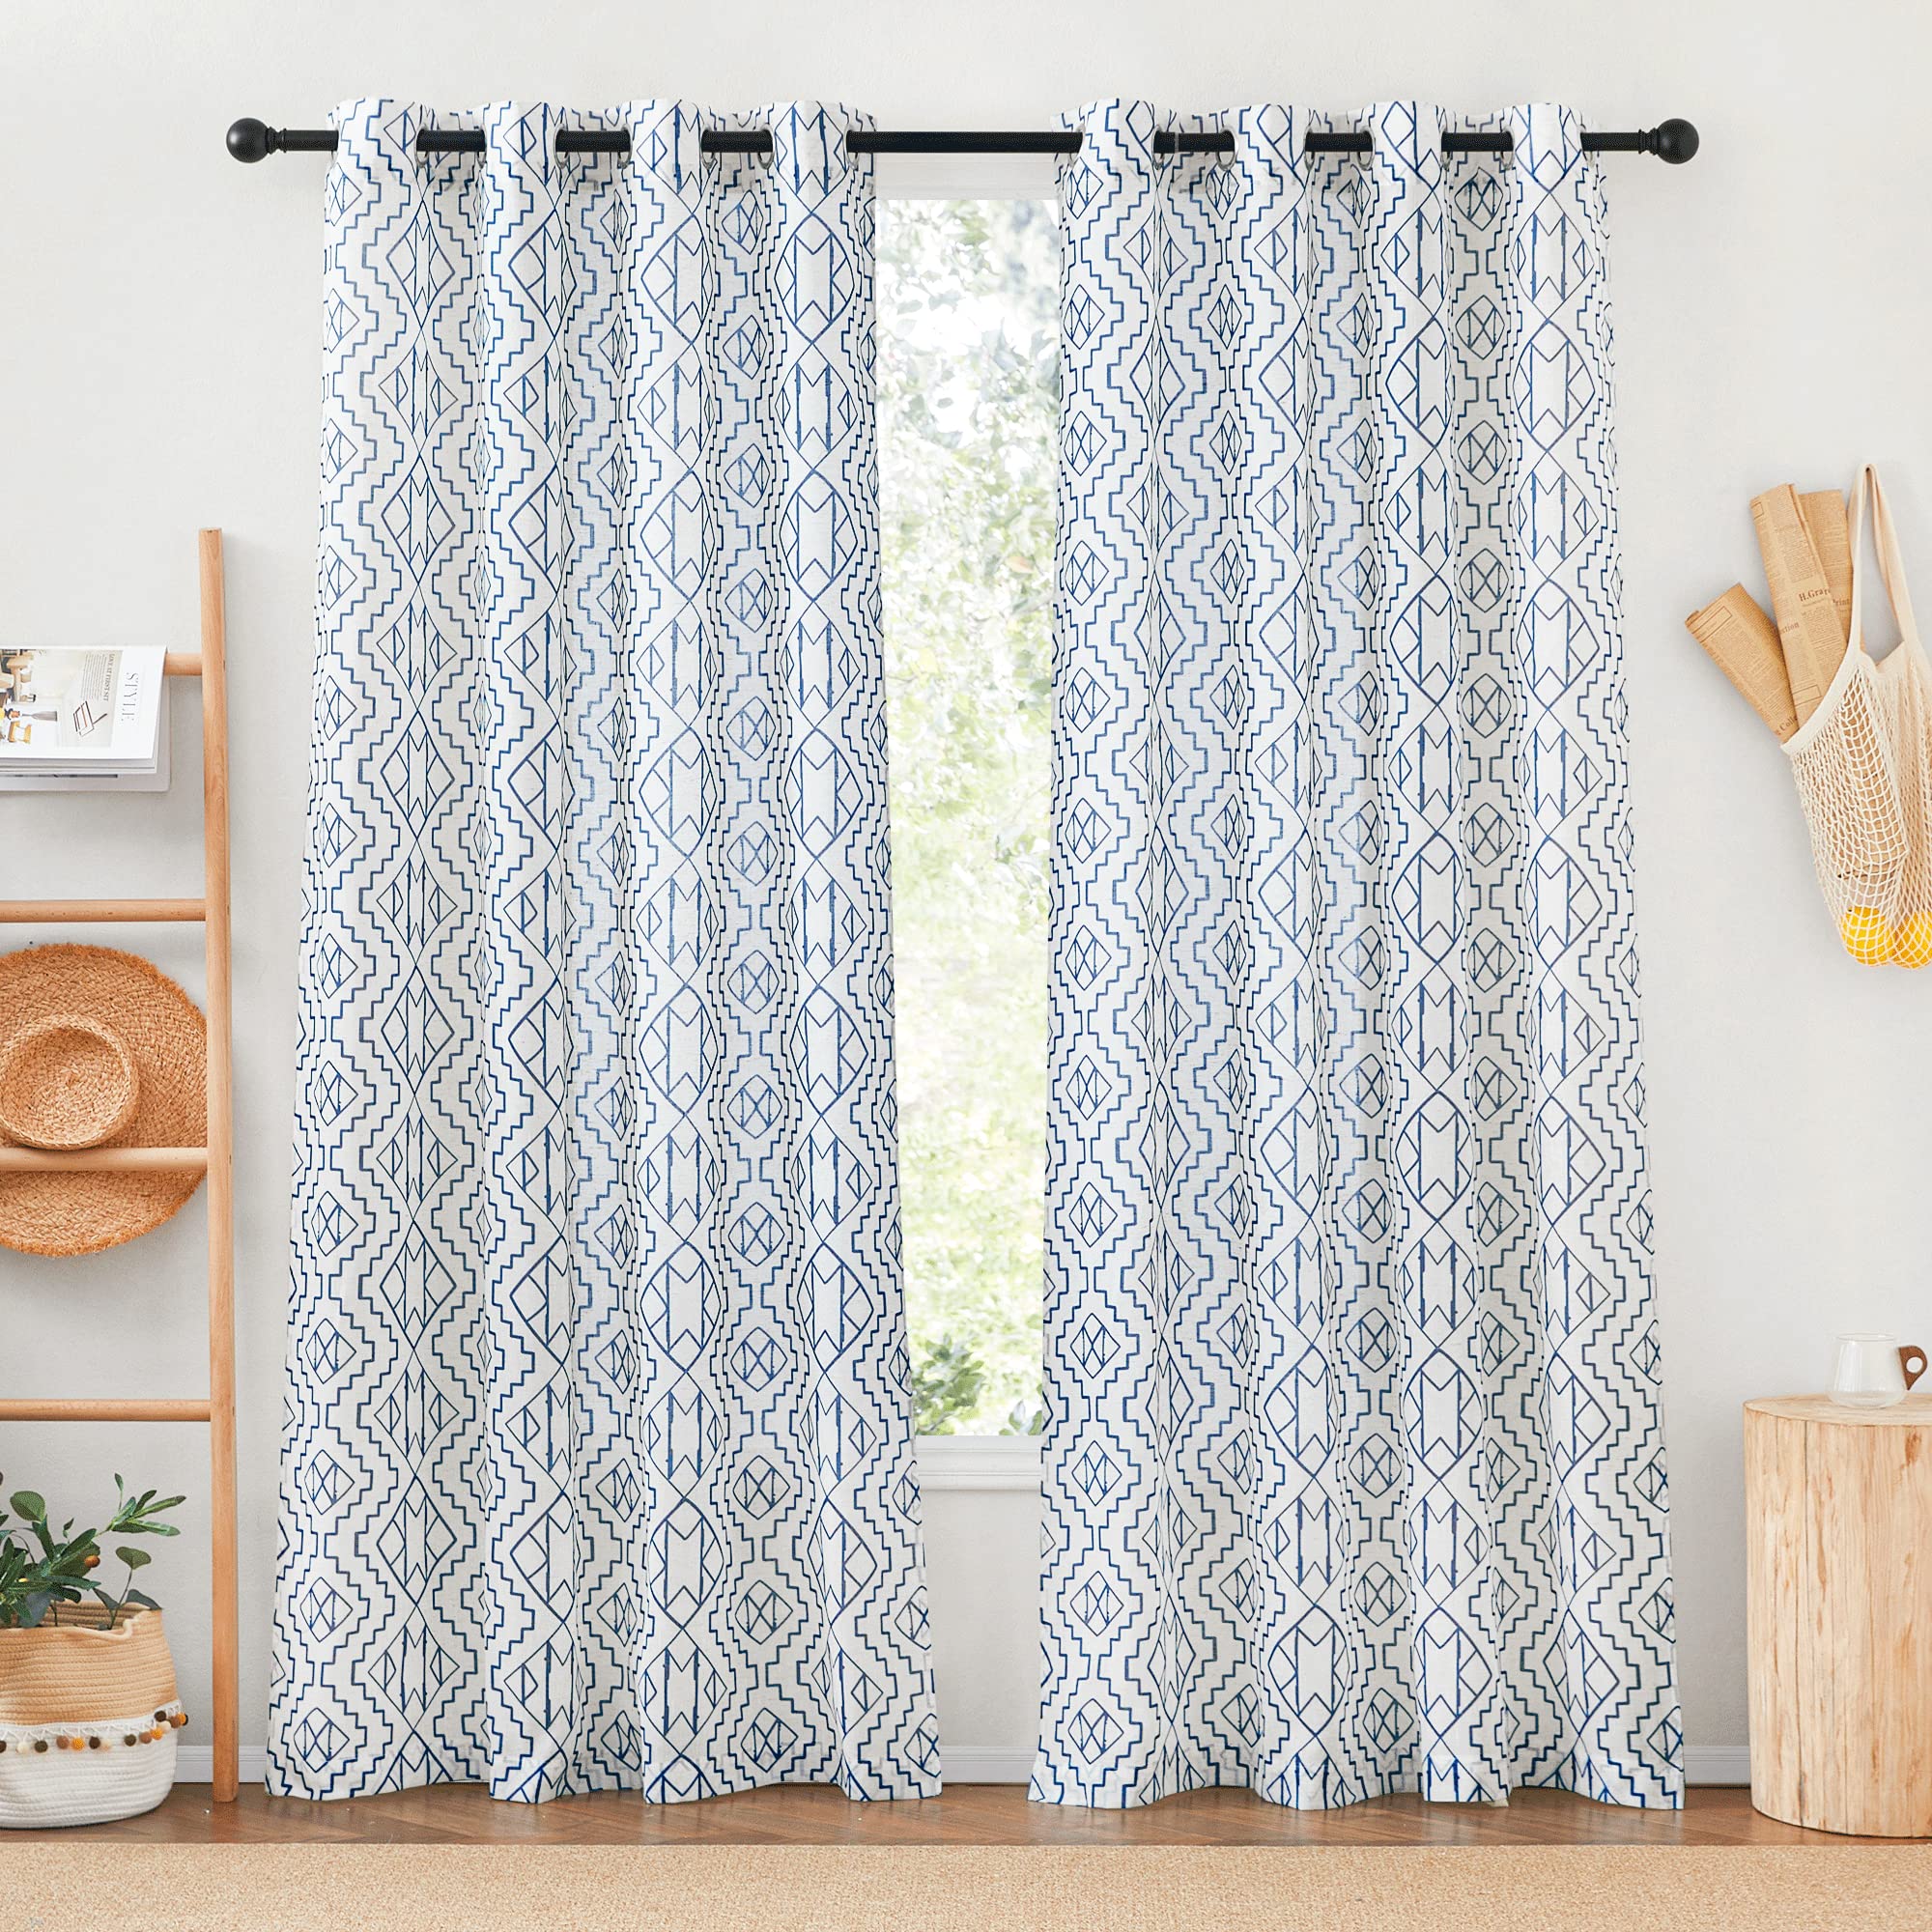 Boho Rustic Geometry Pattern Light Filtering Privacy Window Treatment Sheer Linen Curtains For Bedroom And Living Room，2 Panels